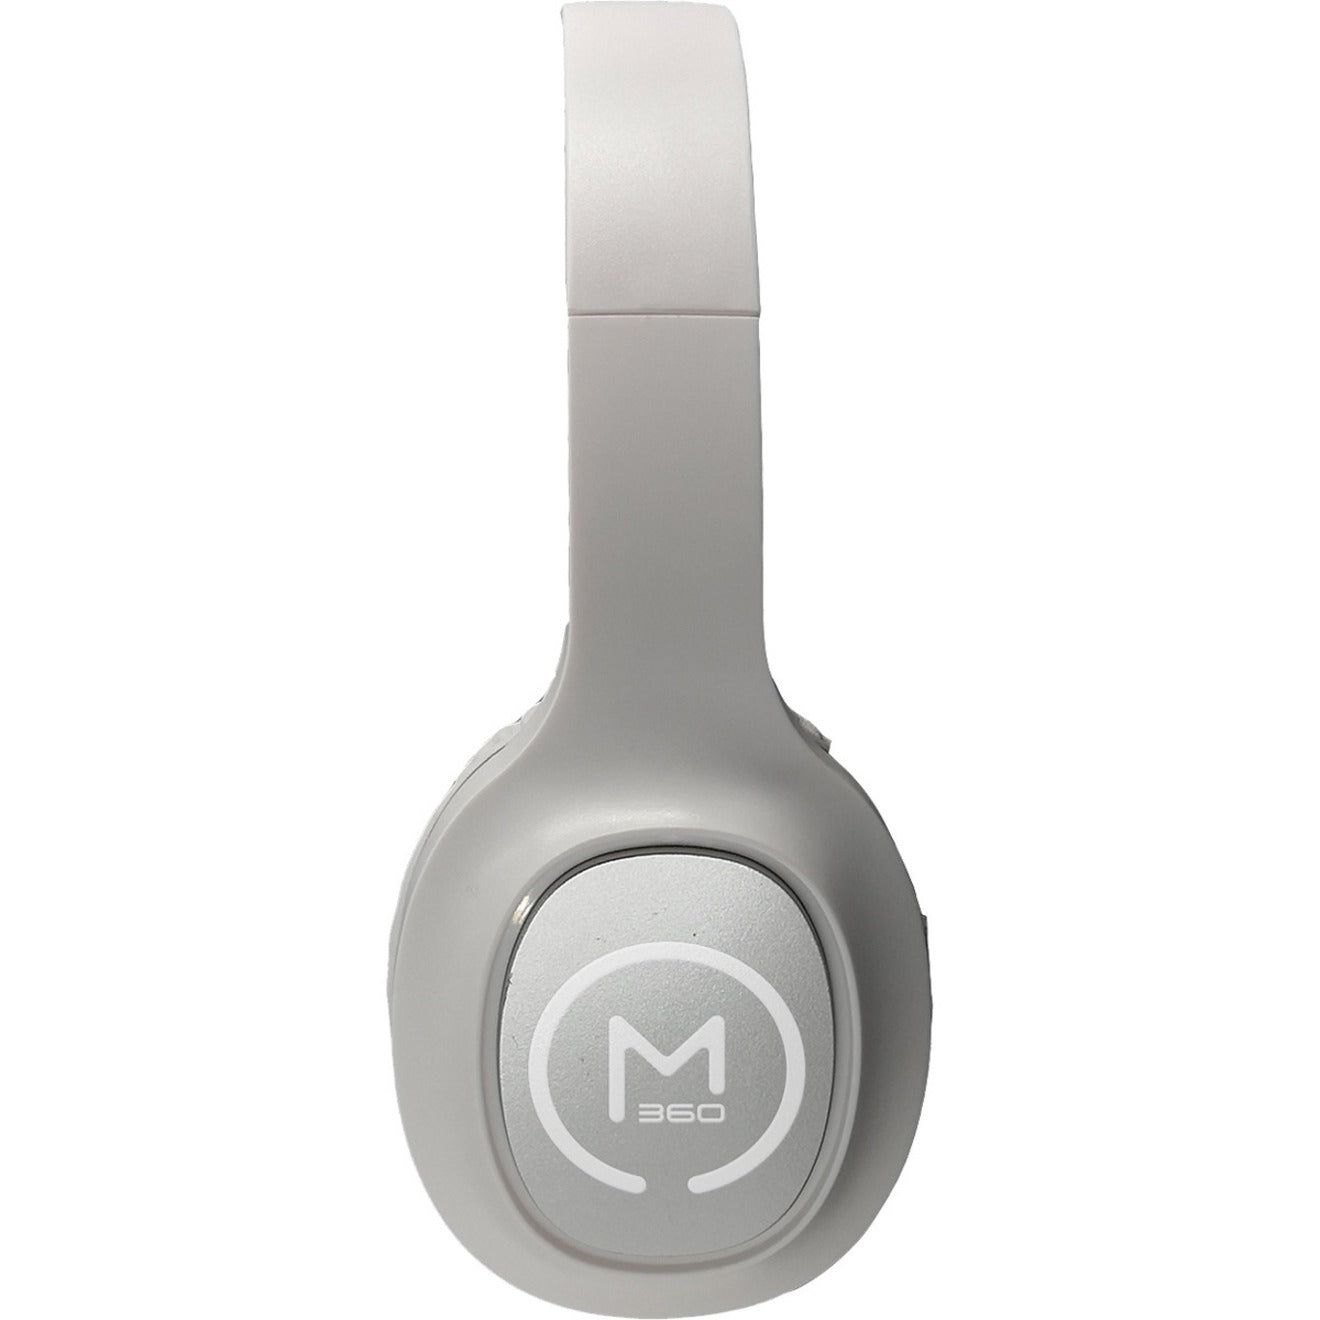 Morpheus 360 HP4500W Wireless Headphone, Comfortable Over-the-head Stereo Headset with Mic, White/Silver Accent